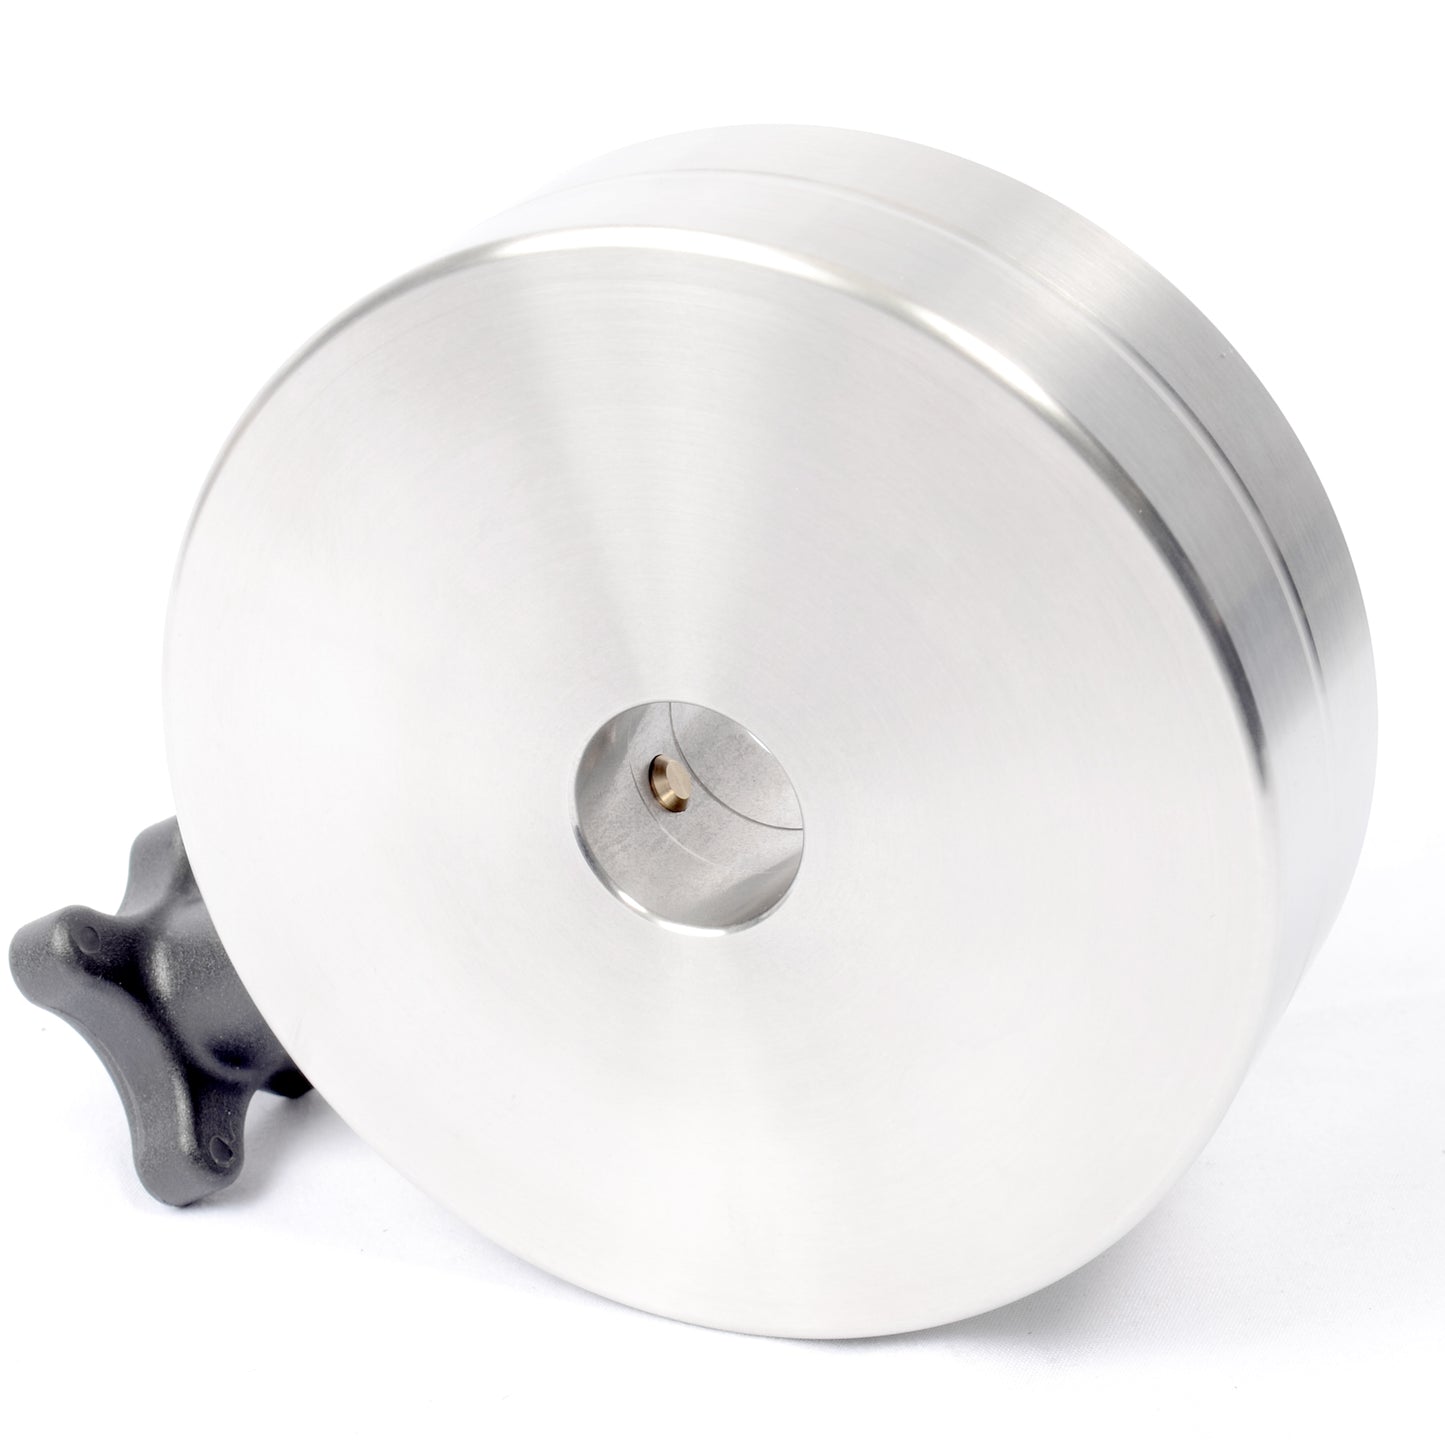 Counter weight. 3.75Kg 125mm diameter Stainless Steel.